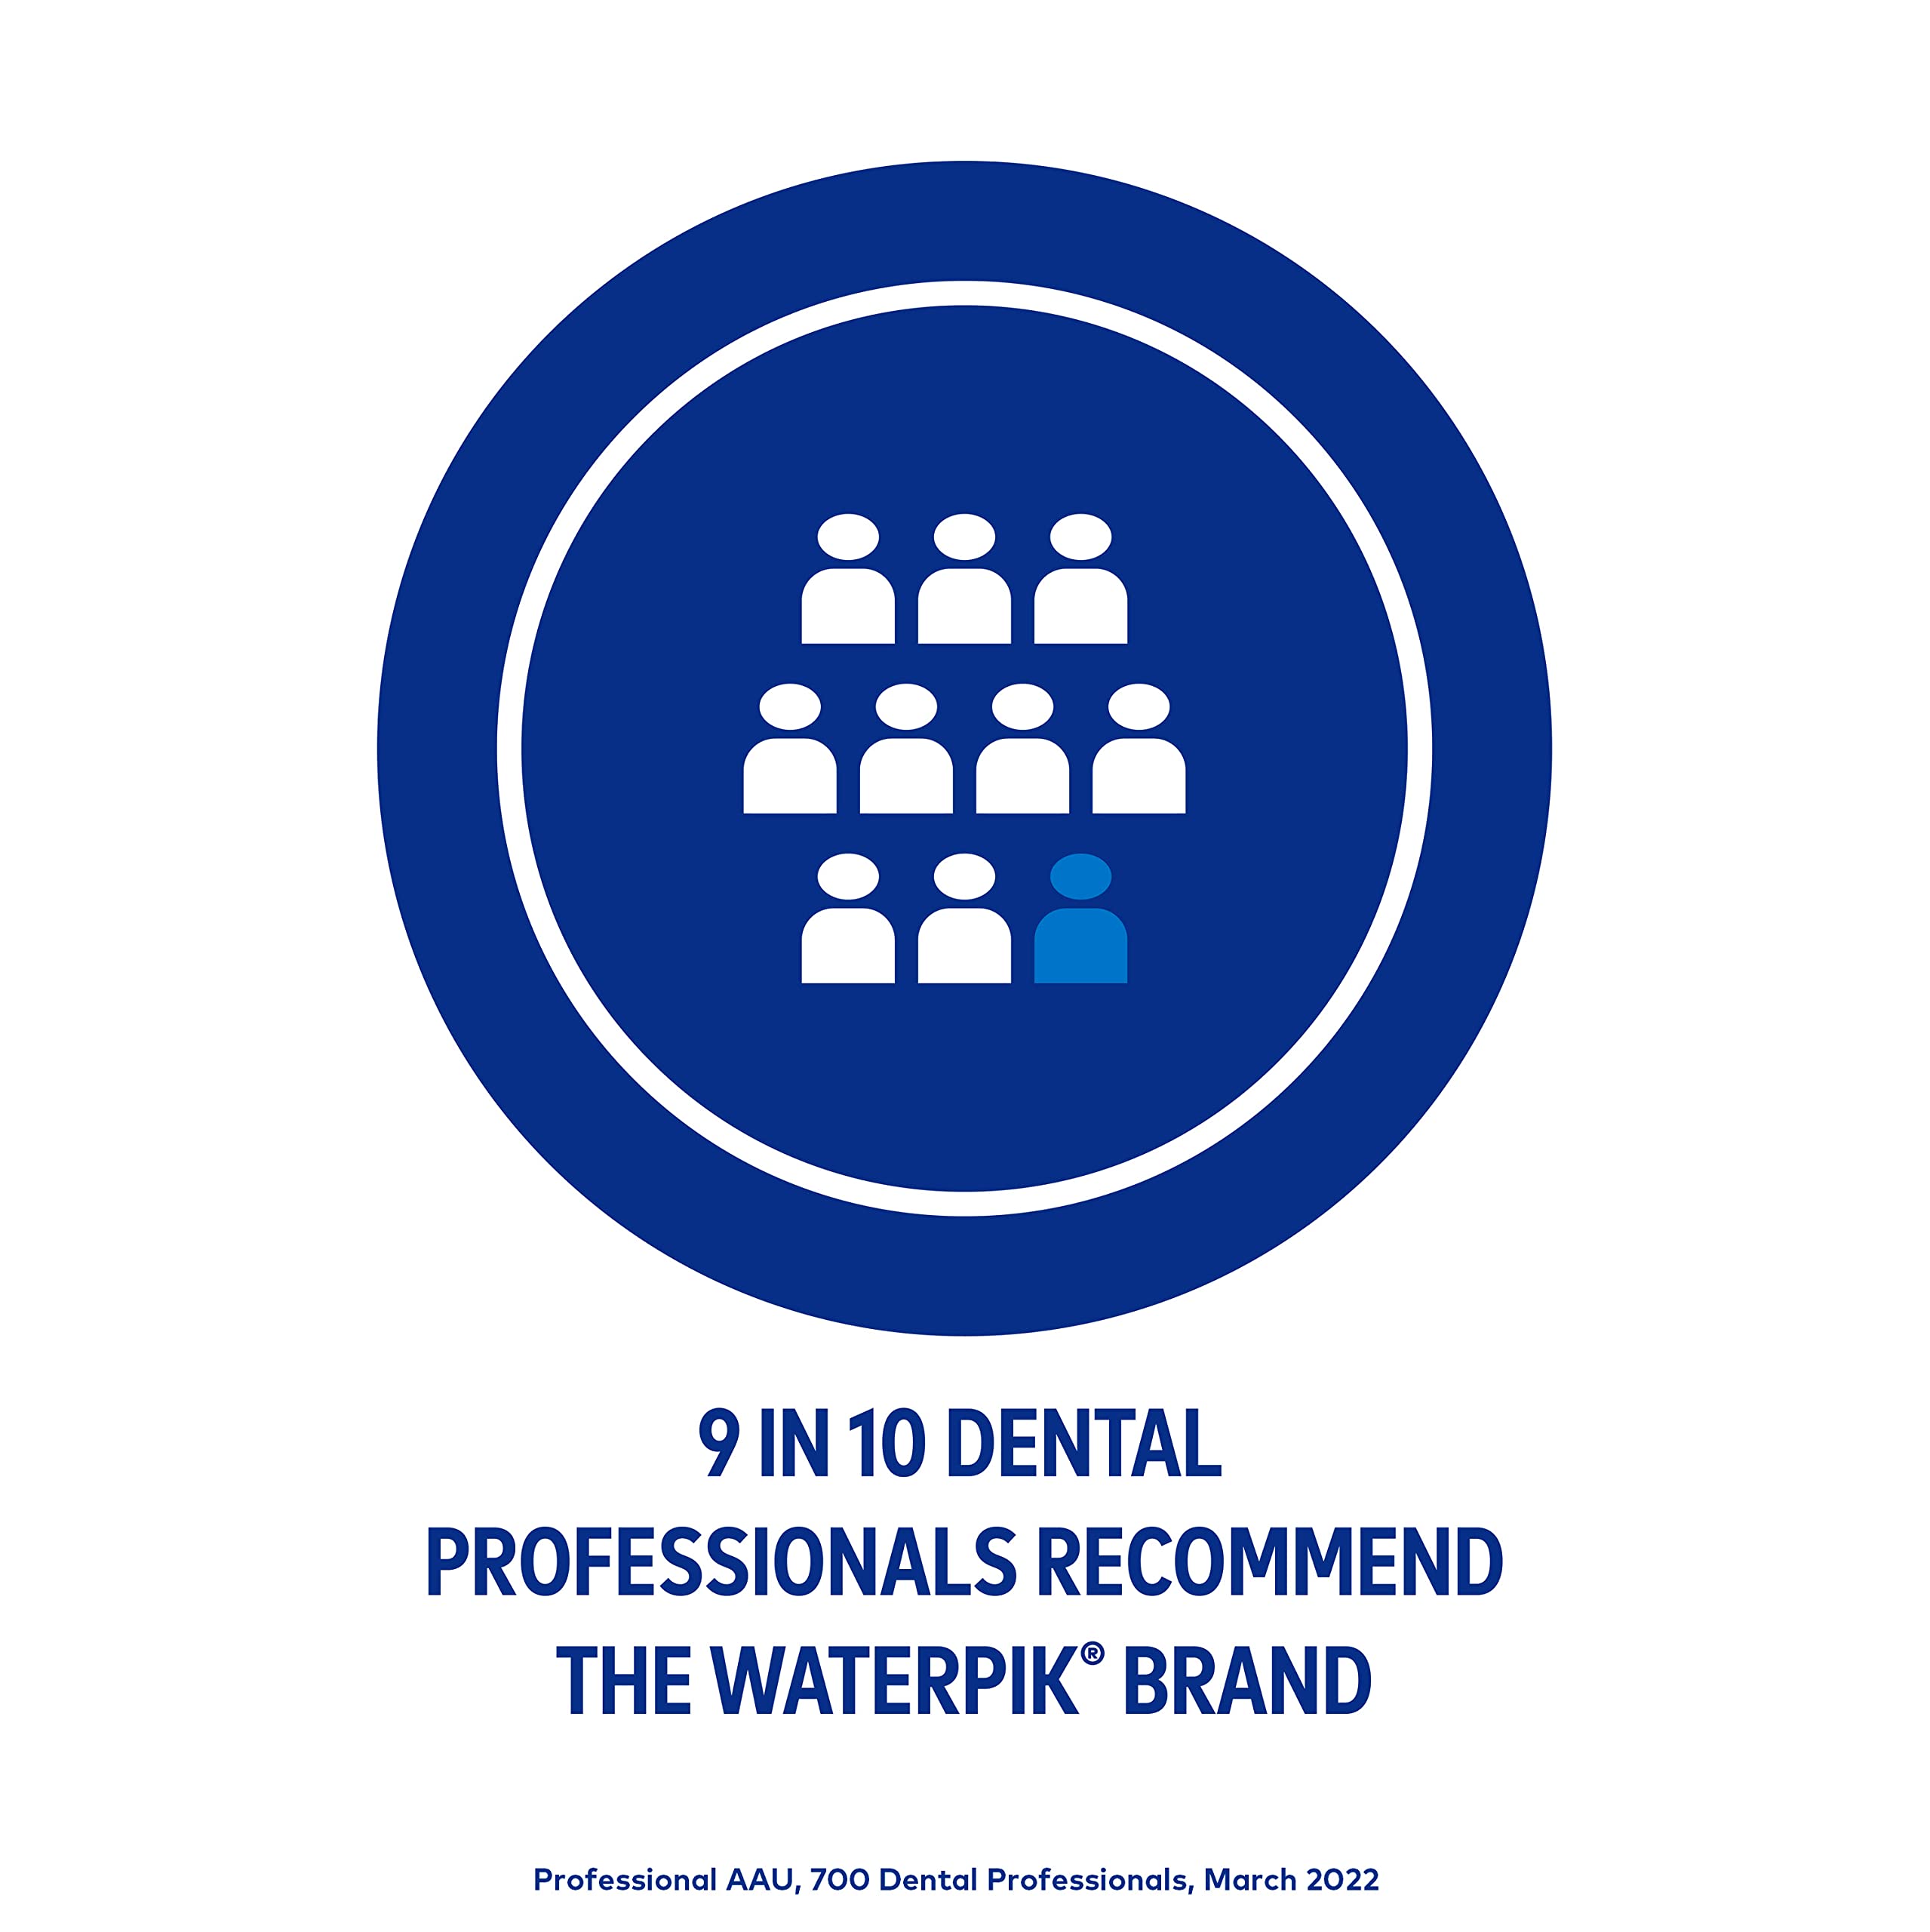 Waterpik Cordless Advanced Water Flosser For Teeth, Gums, Braces, Dental Care With Travel Bag and 4 Tips, ADA Accepted, Rechargeable, Portable, and Waterproof, White WP-580